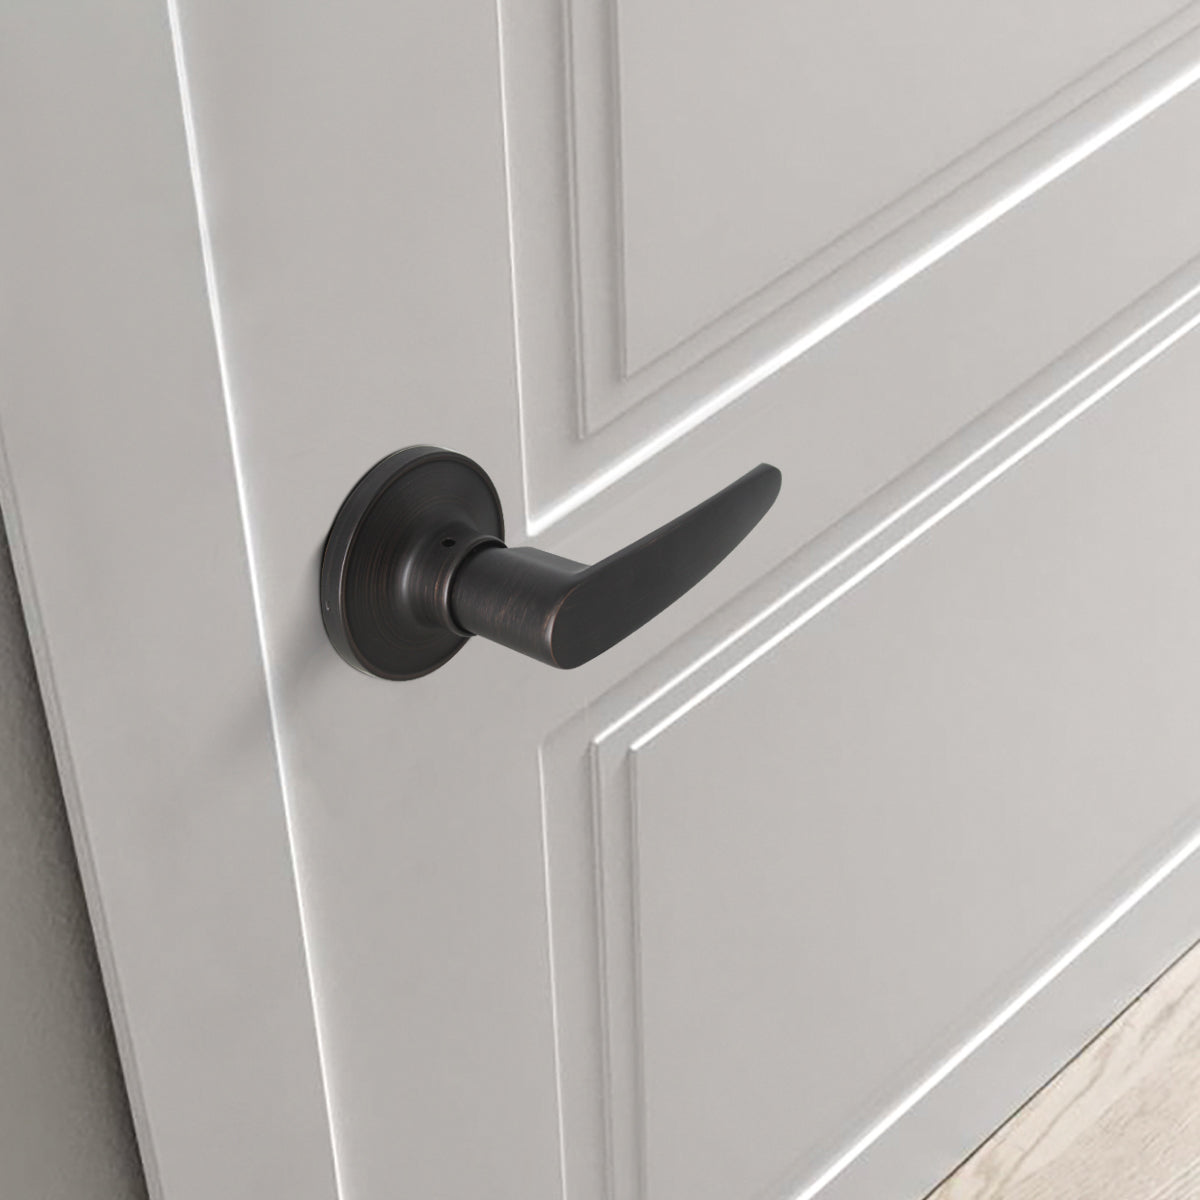 Passage Door Lever set for Closet and Hall, Leaf Style, Oil Rubbed Bronze finish DL815ORBPS